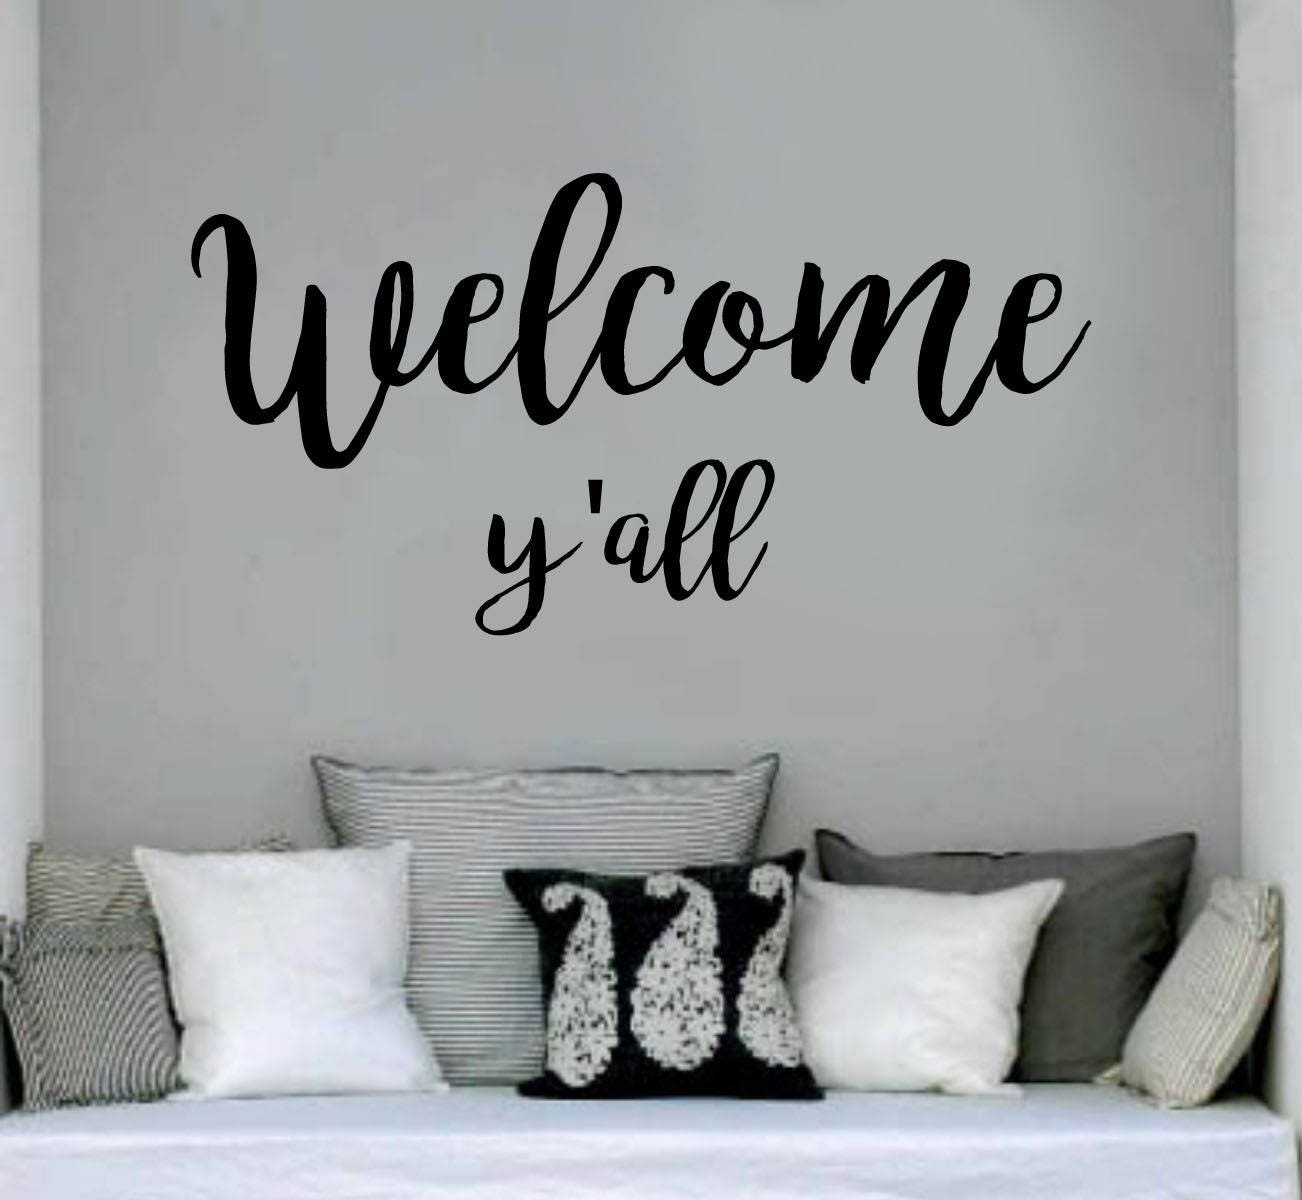 Family Wall Quotes Decal Welcome Y All Wall Decals Wall